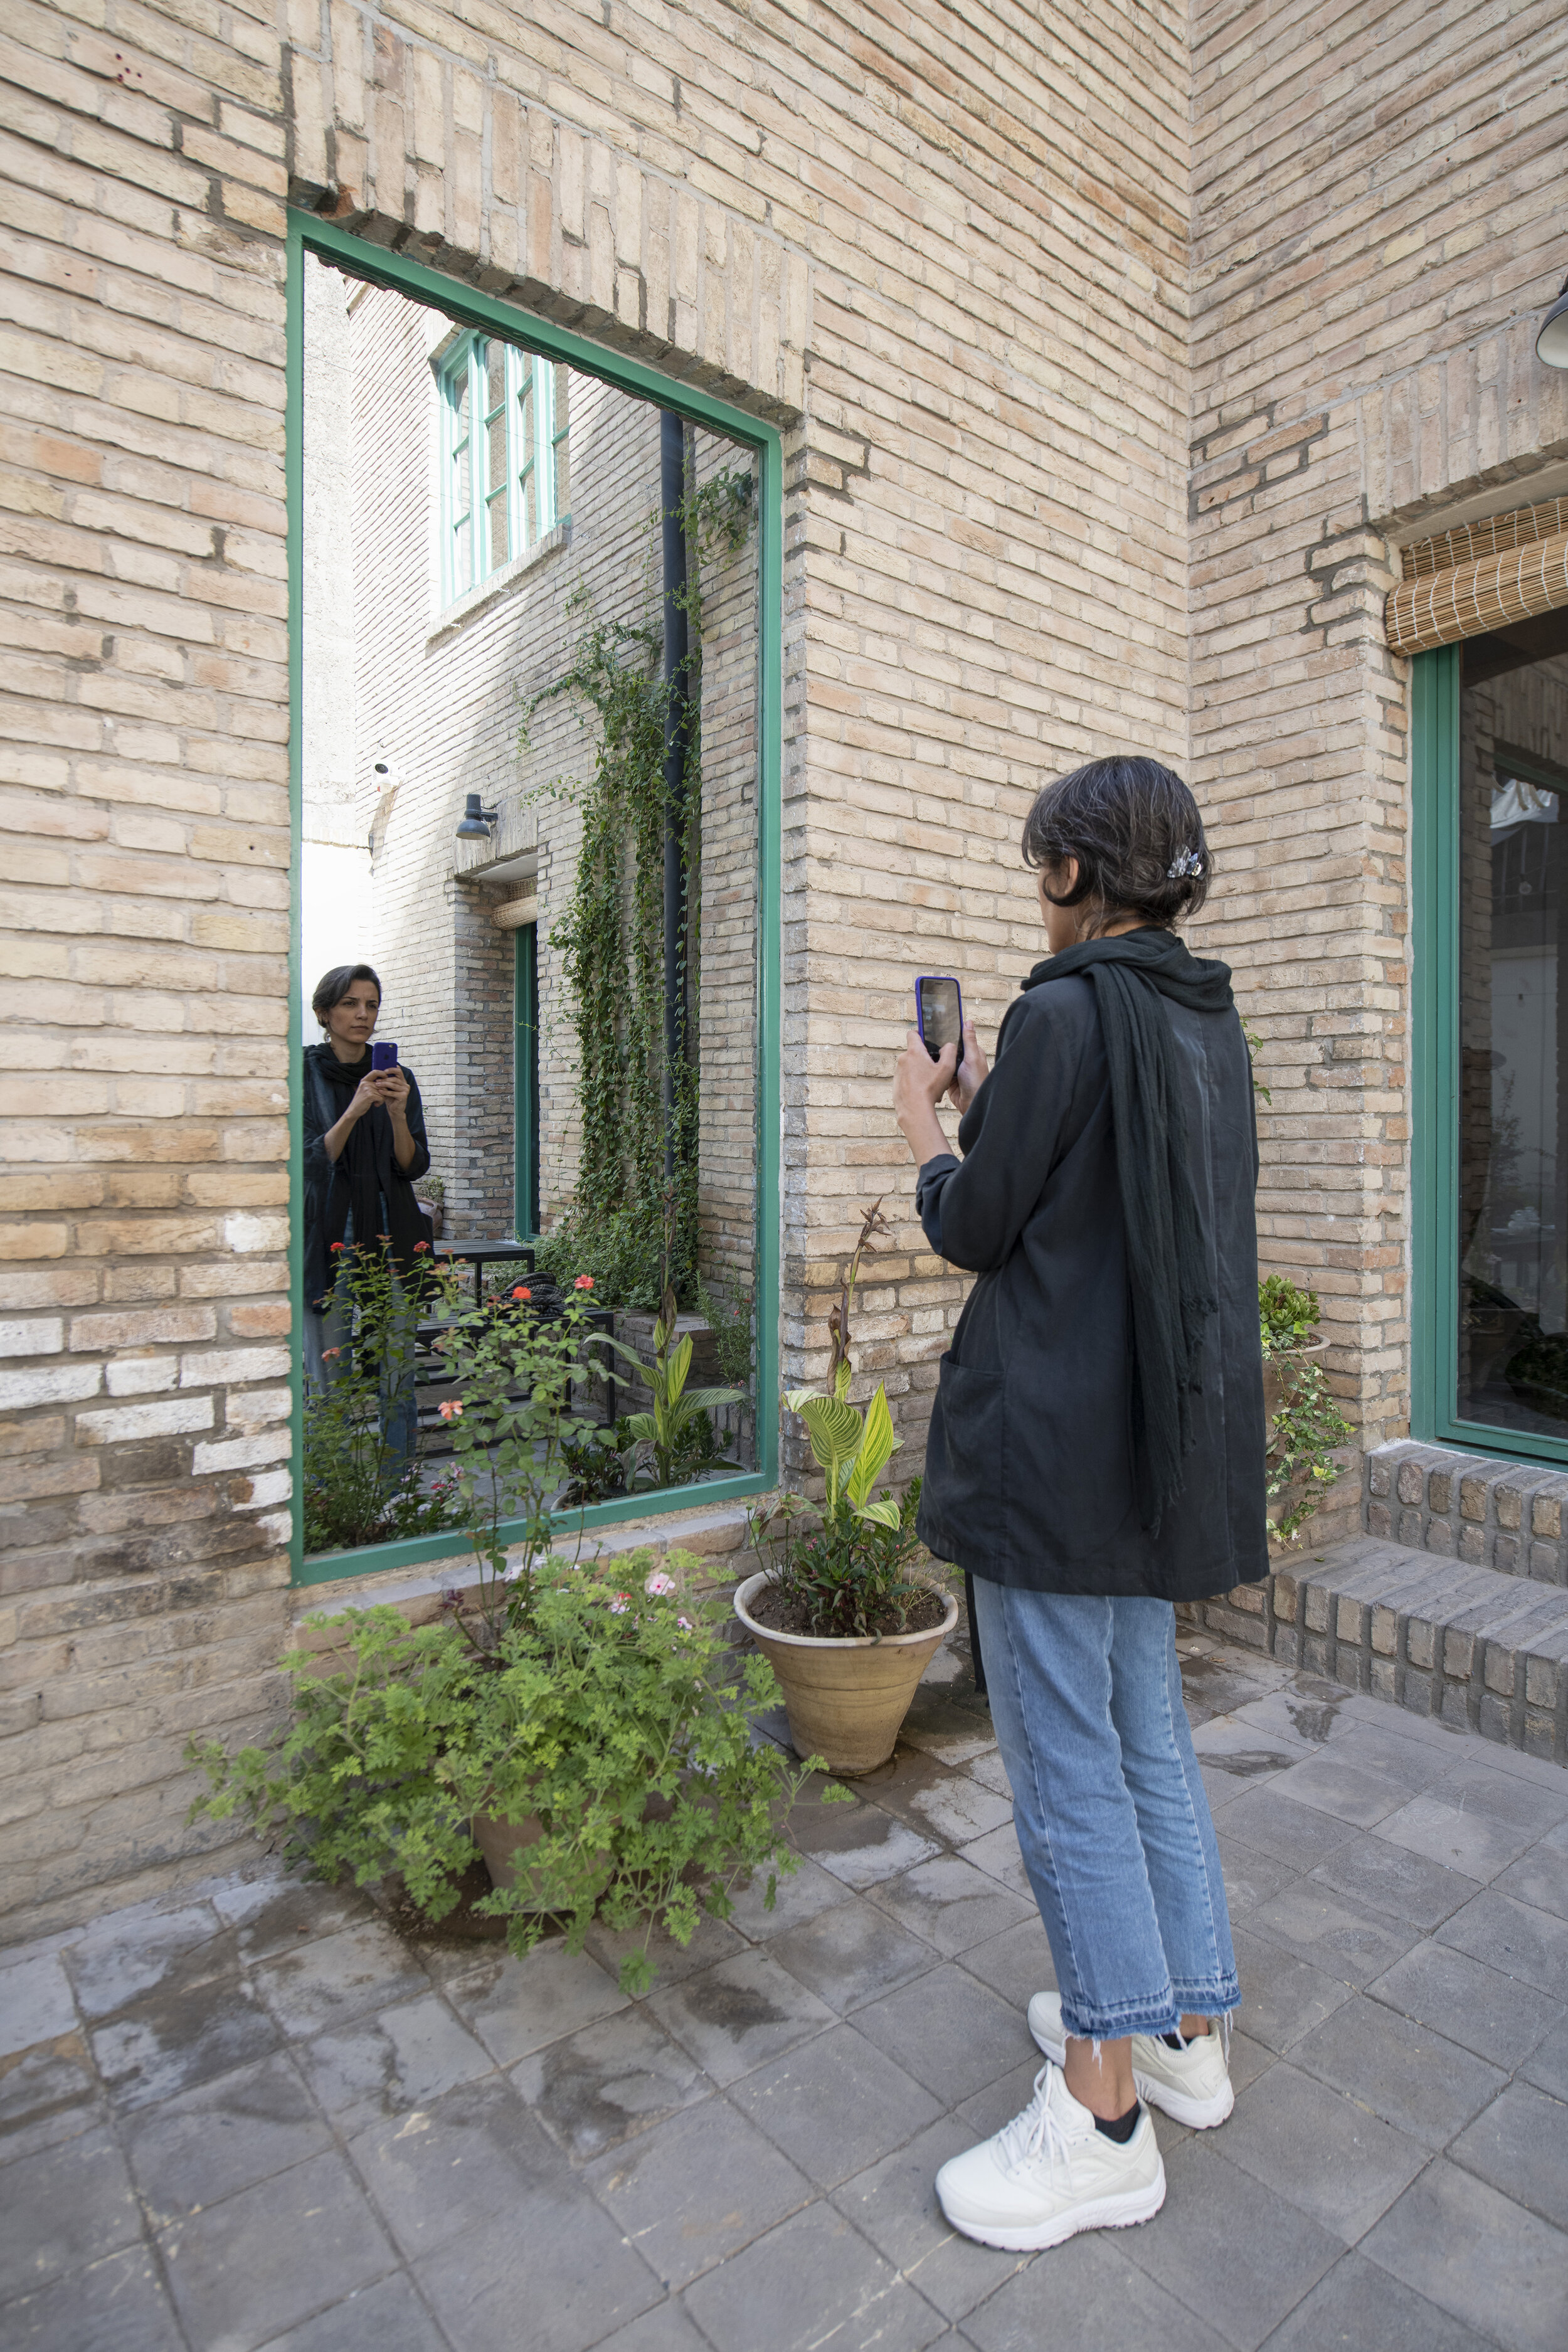  The courtyard view to: Untitled (One-way Mirror to the Communal Room)  One-way Mirror  230 x 109 CM (بدون عنوان (آینه یکطرفه به اطاق اشتراکی  * A visitor is looking into the mirror side of the “one-way mirror” and taking a selfie not realizing she i